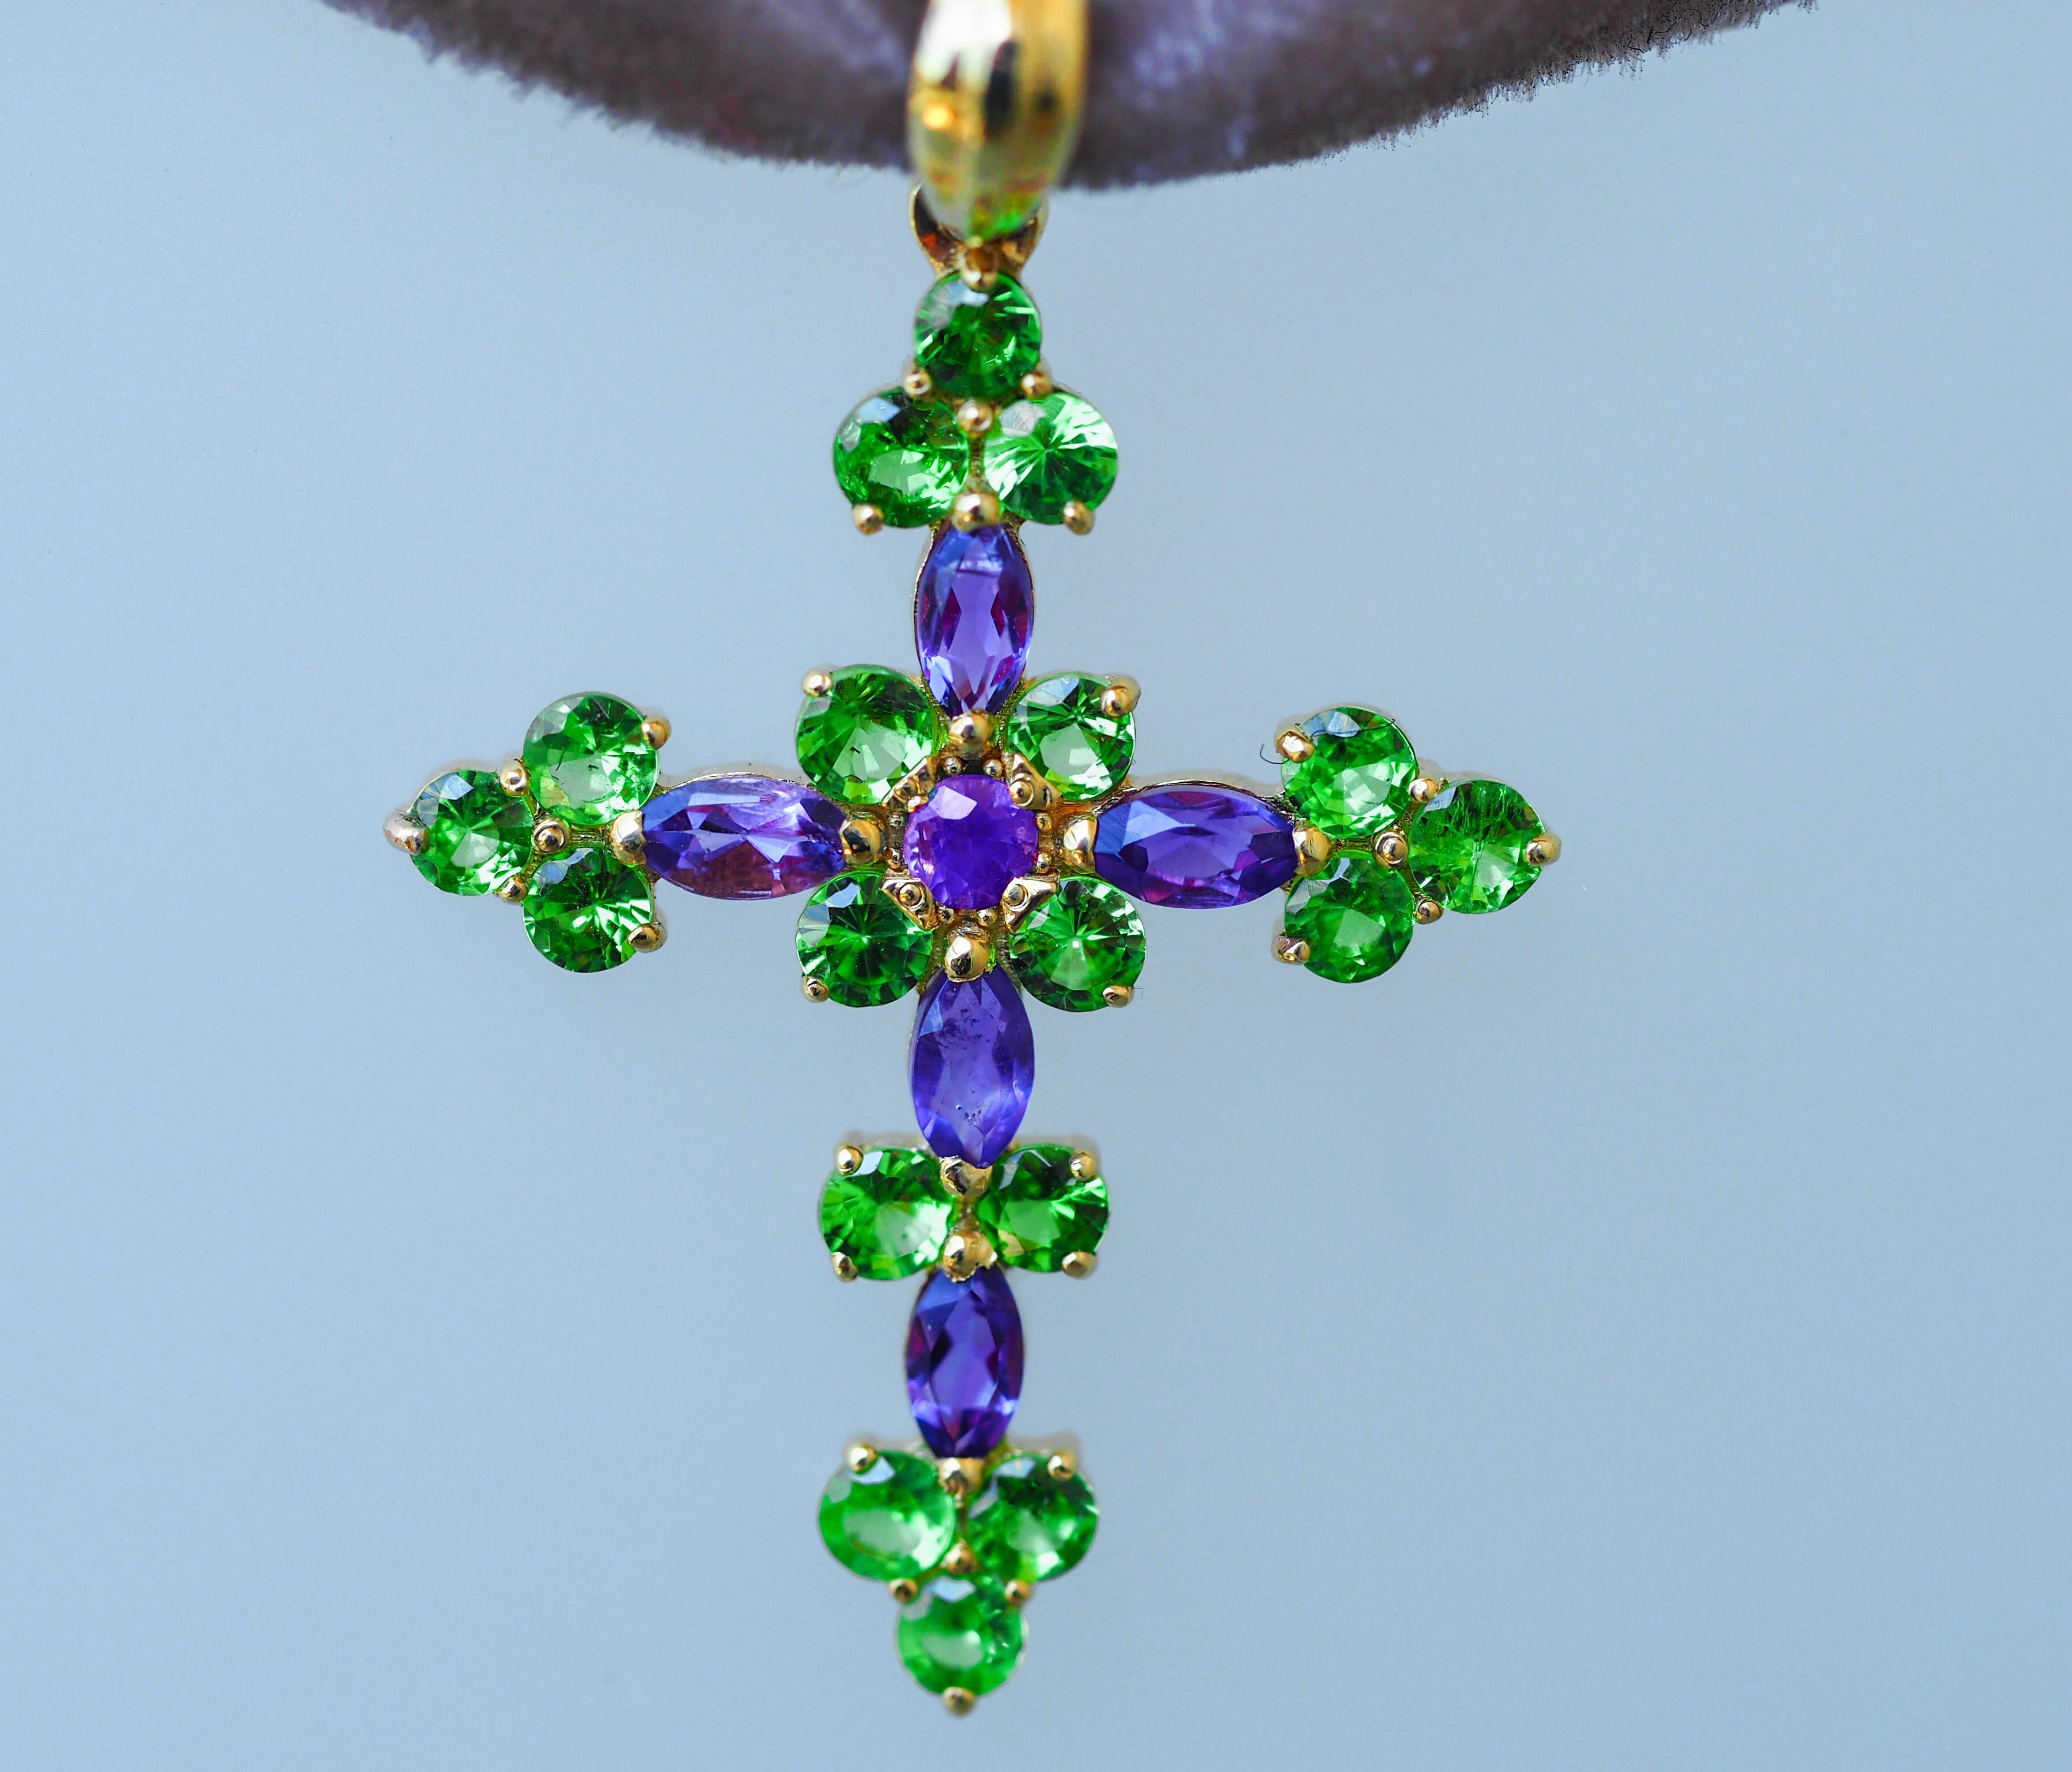 14 kt solid gold Cross pendant with natural colored stones: amethysts and tsavorite (green garnet)

Weight: 1.9 g.
Gold: 14kt solid yellow gold
Size: 31 x 19 mm.
Natural stones:
1. Tsavorite garnet: round cut, green color, transparent, approx 0.50